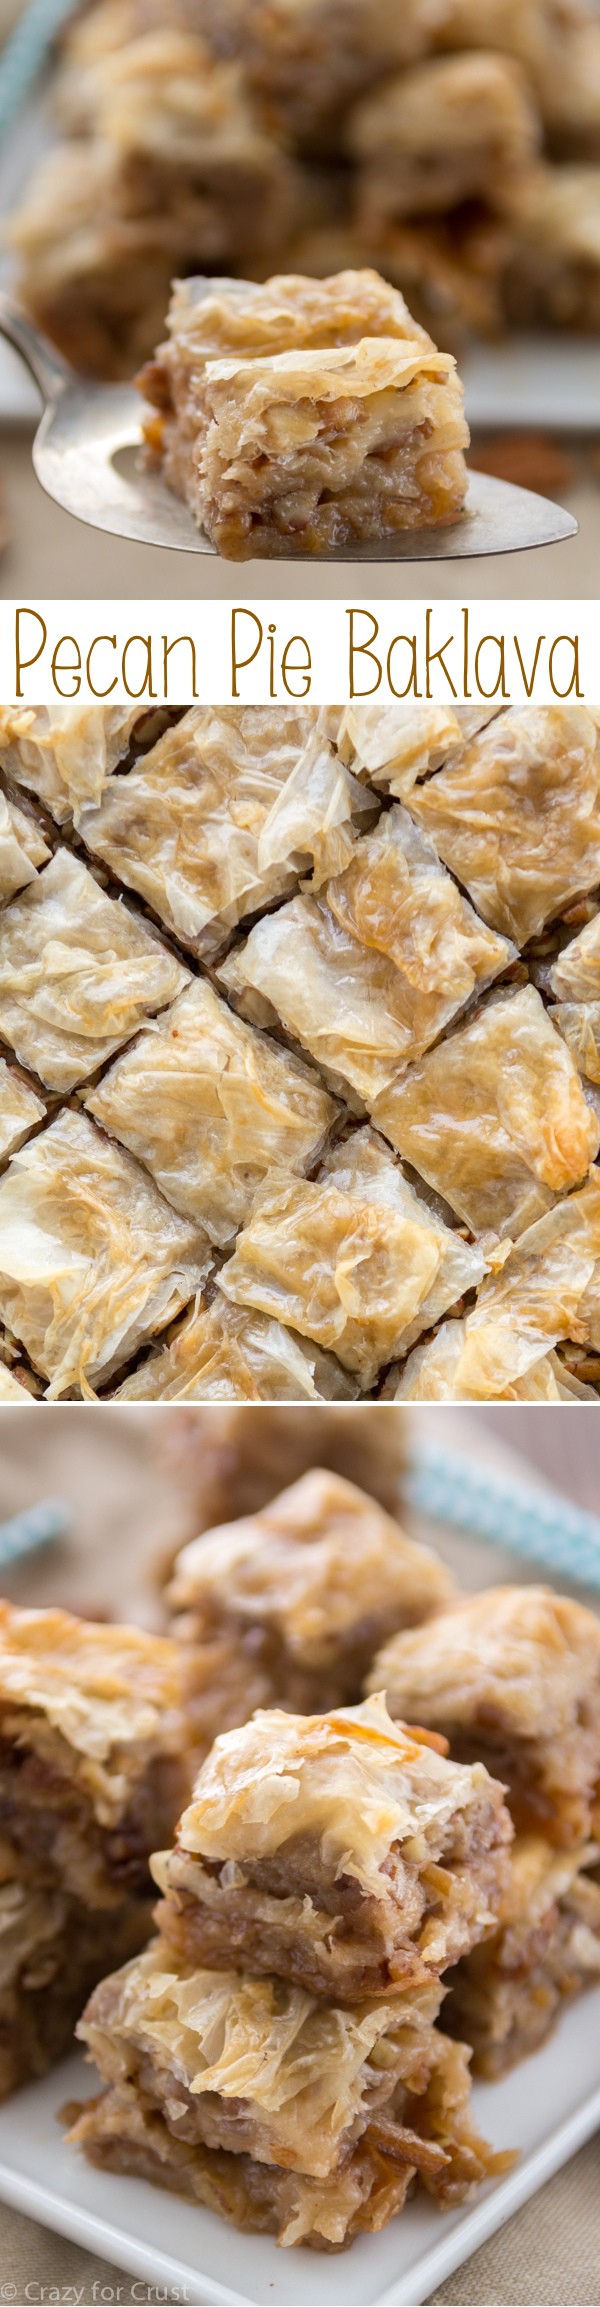 Pecan Pie Baklava has layers of flaky phyllo with pecans, butter, and a pecan pie flavored syrup!